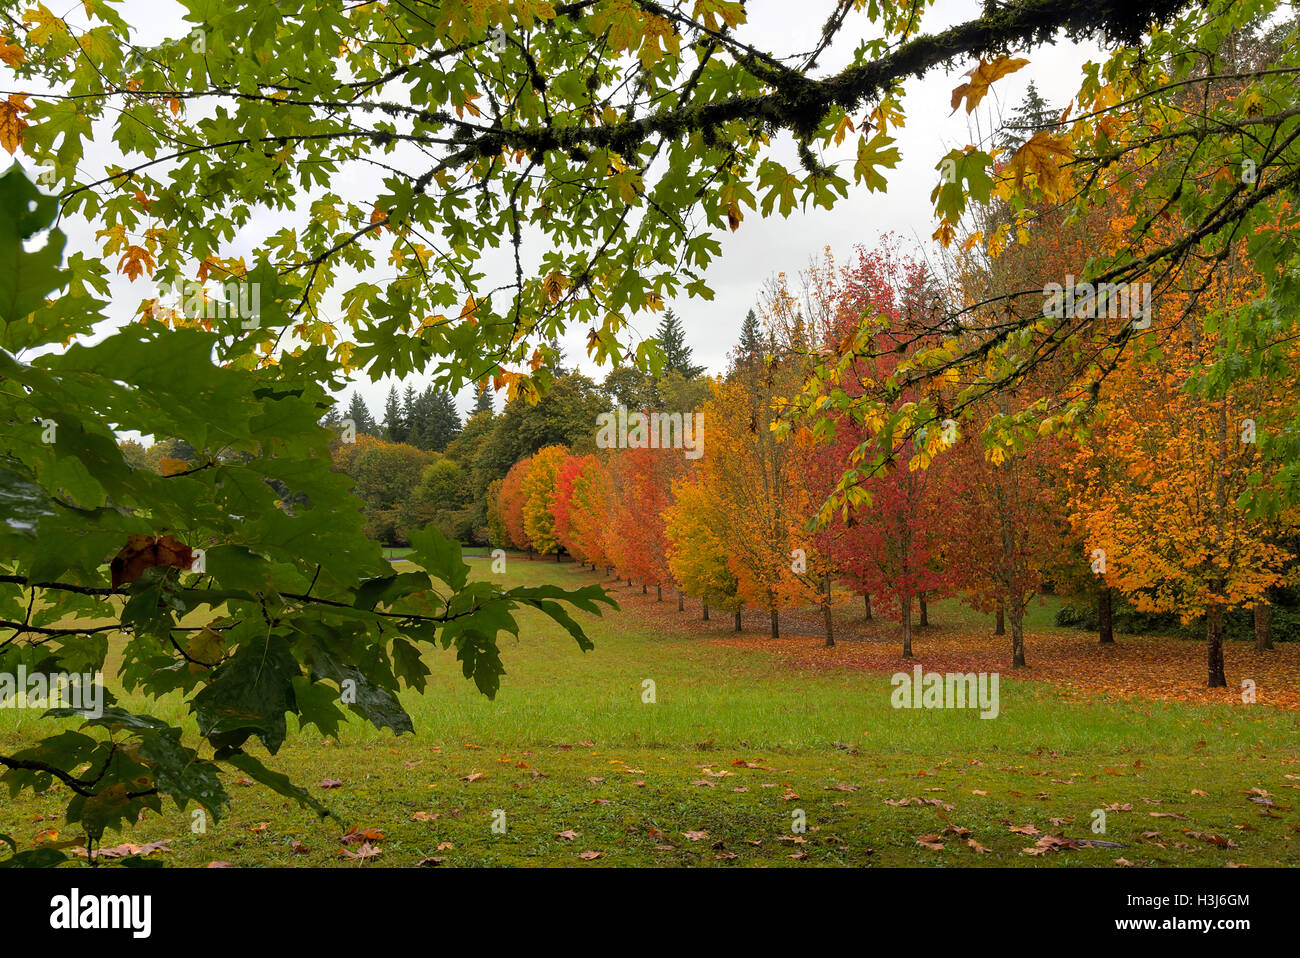 Fall Colors of Maple Trees in the Park during Autumn Stock Photo